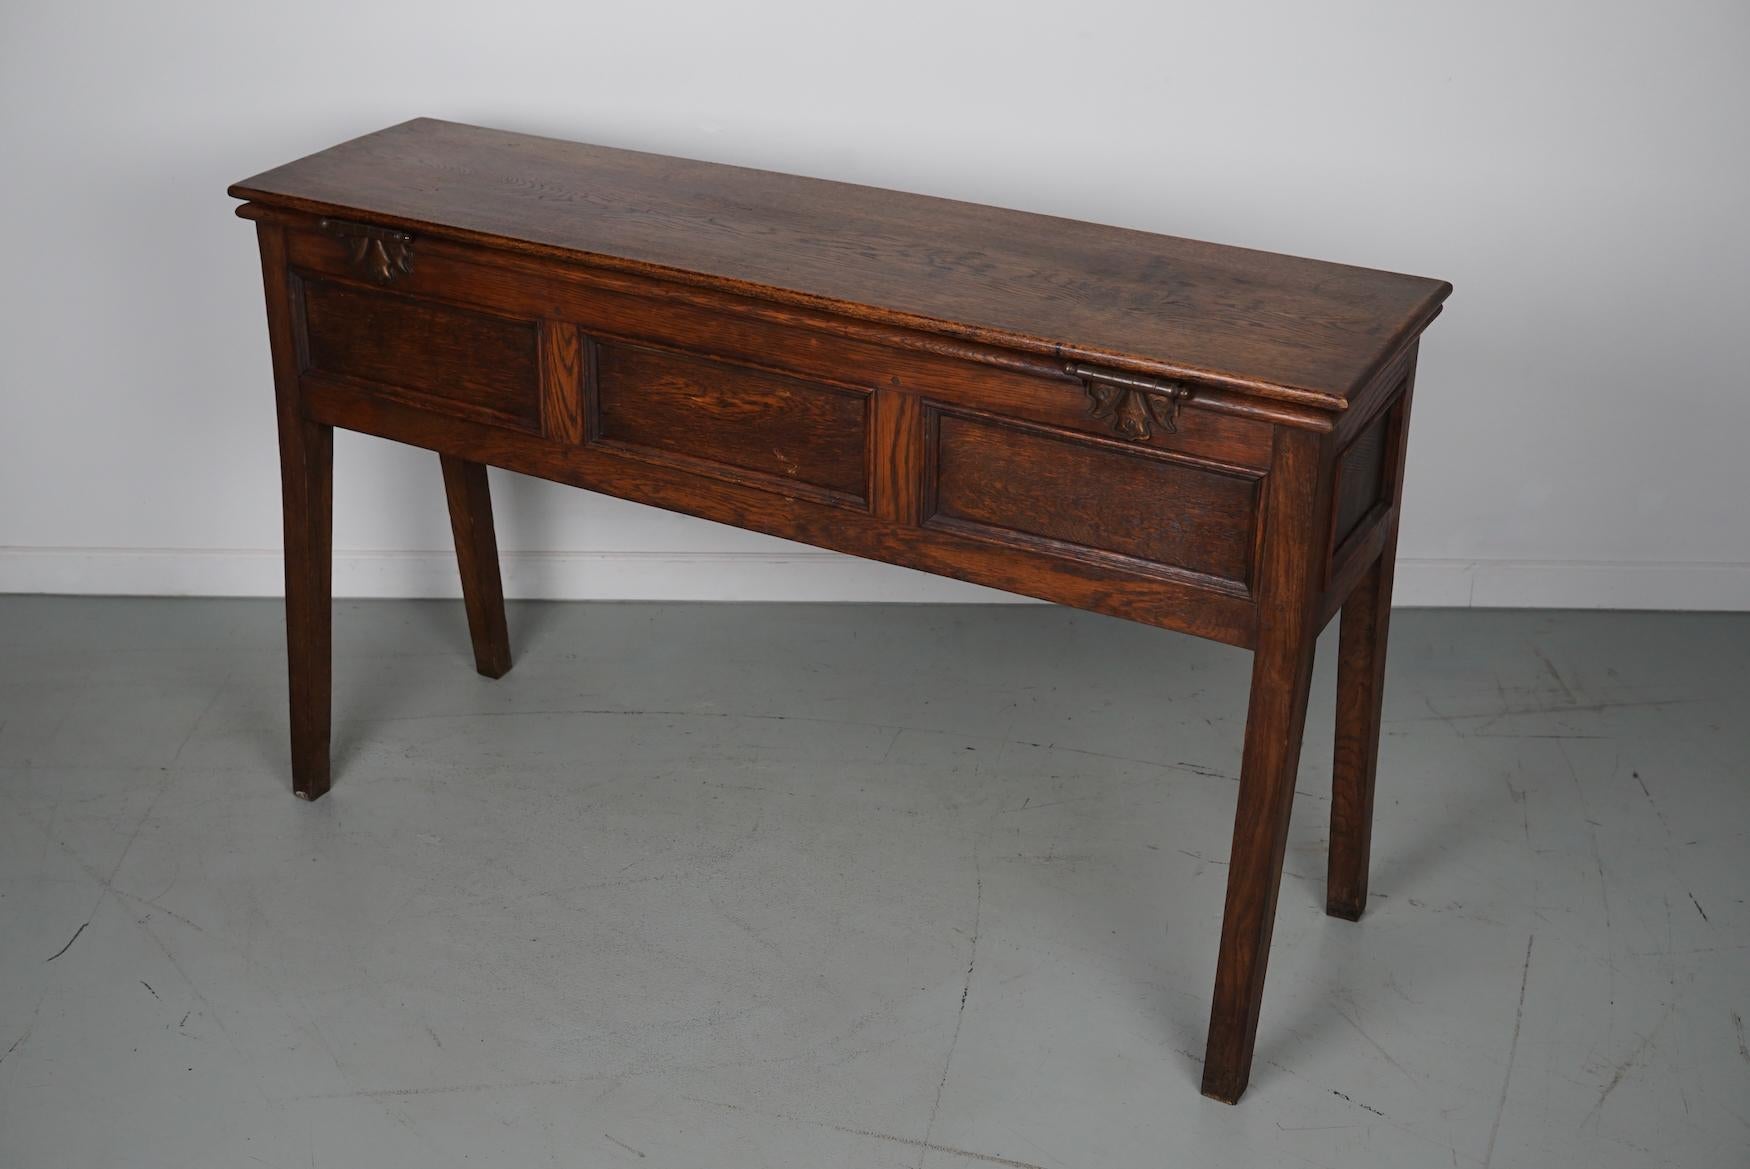 This elegant table was made in England. The table was made in solid oak with a beautiful grain pattern. It has a warm color with deep gloss. It was originally a payment table and later in it's life converted into this side table with storage.